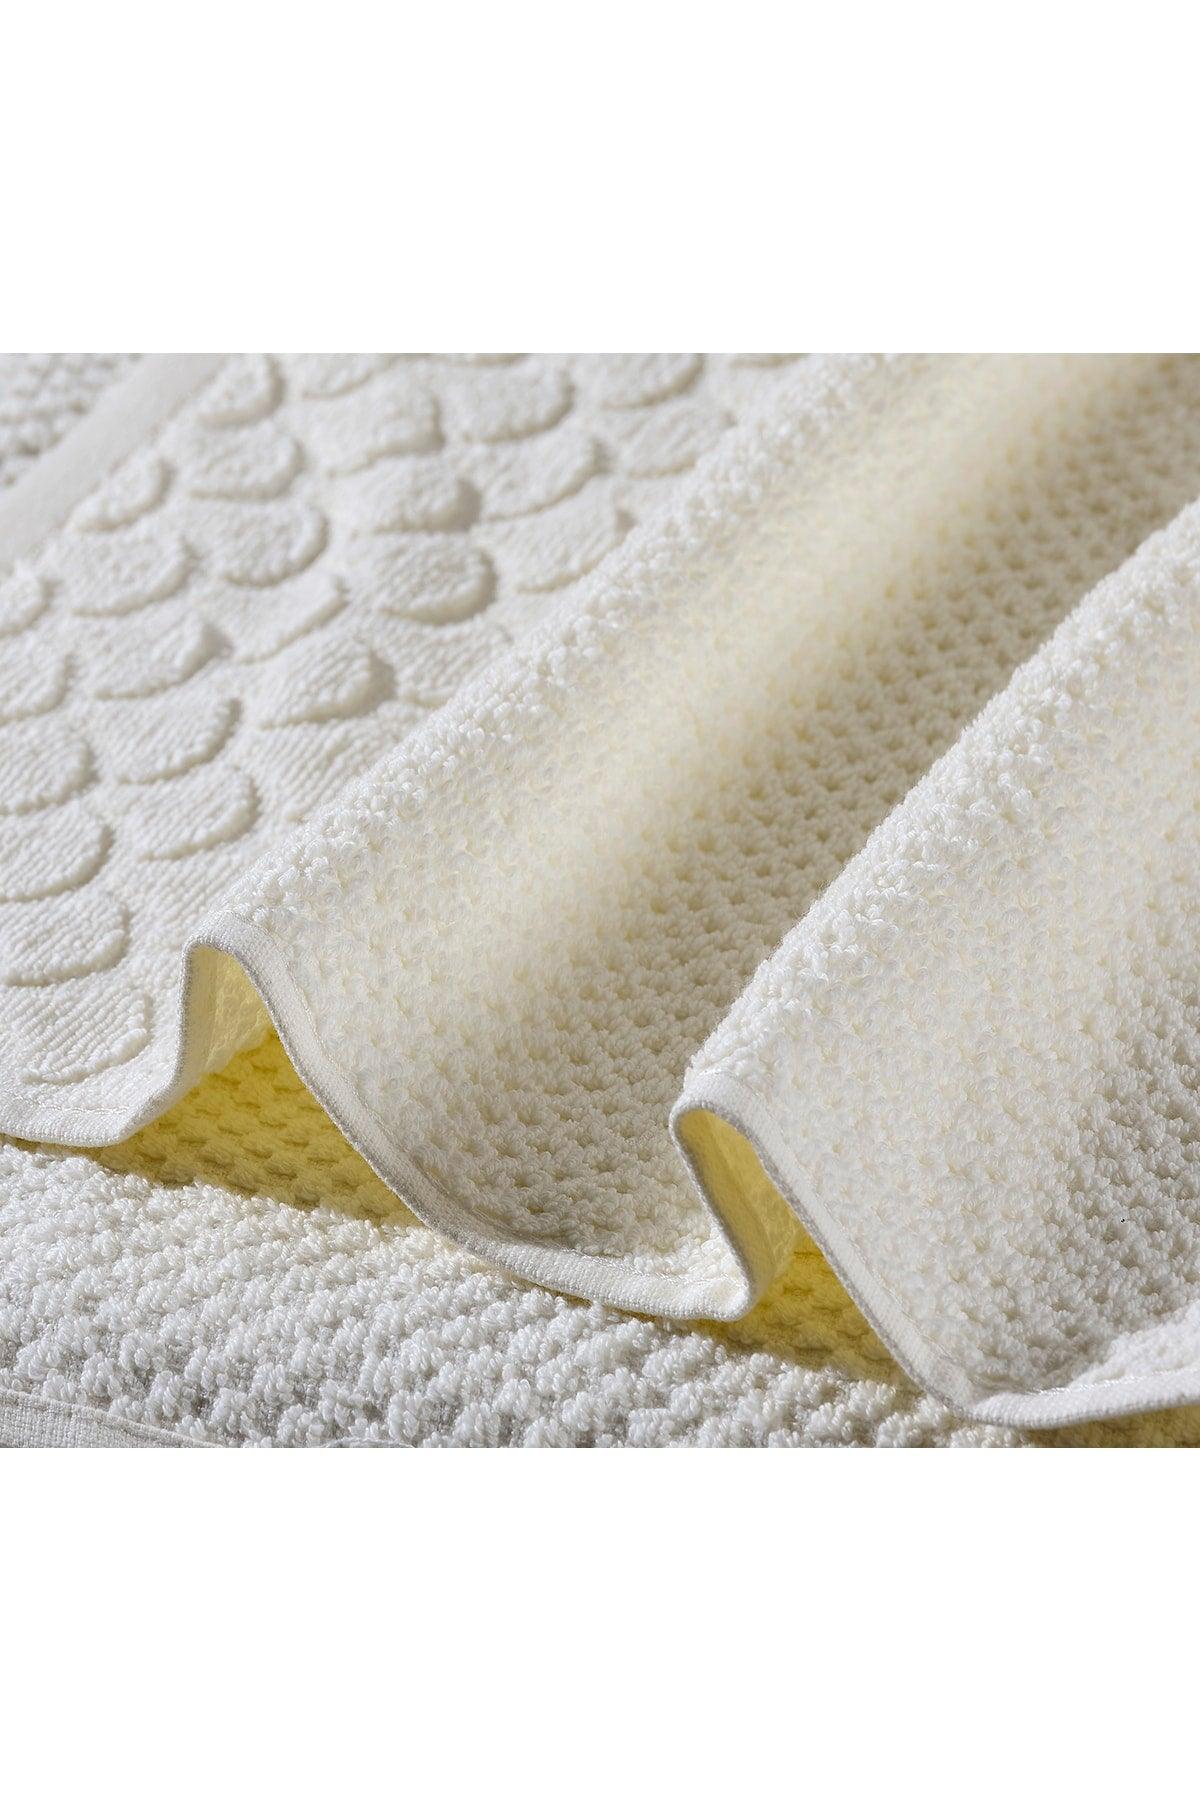 | Extra Soft Cotton Rice Knitted Towel Set of 4 - Swordslife